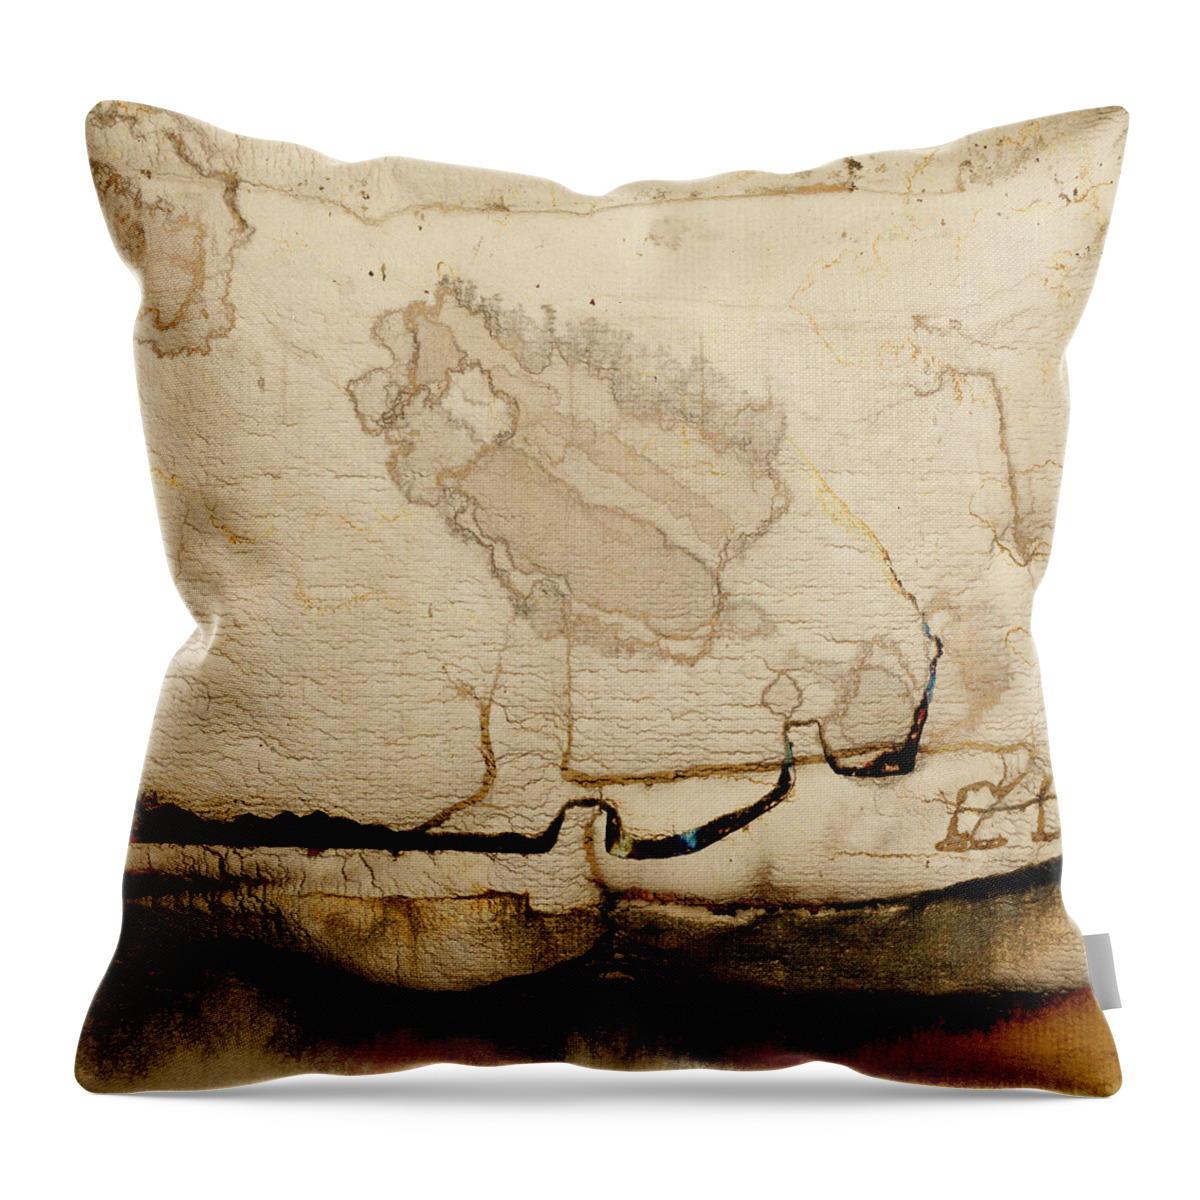 Abstract Throw Pillow featuring the mixed media Waterlines02 by Carol Leigh